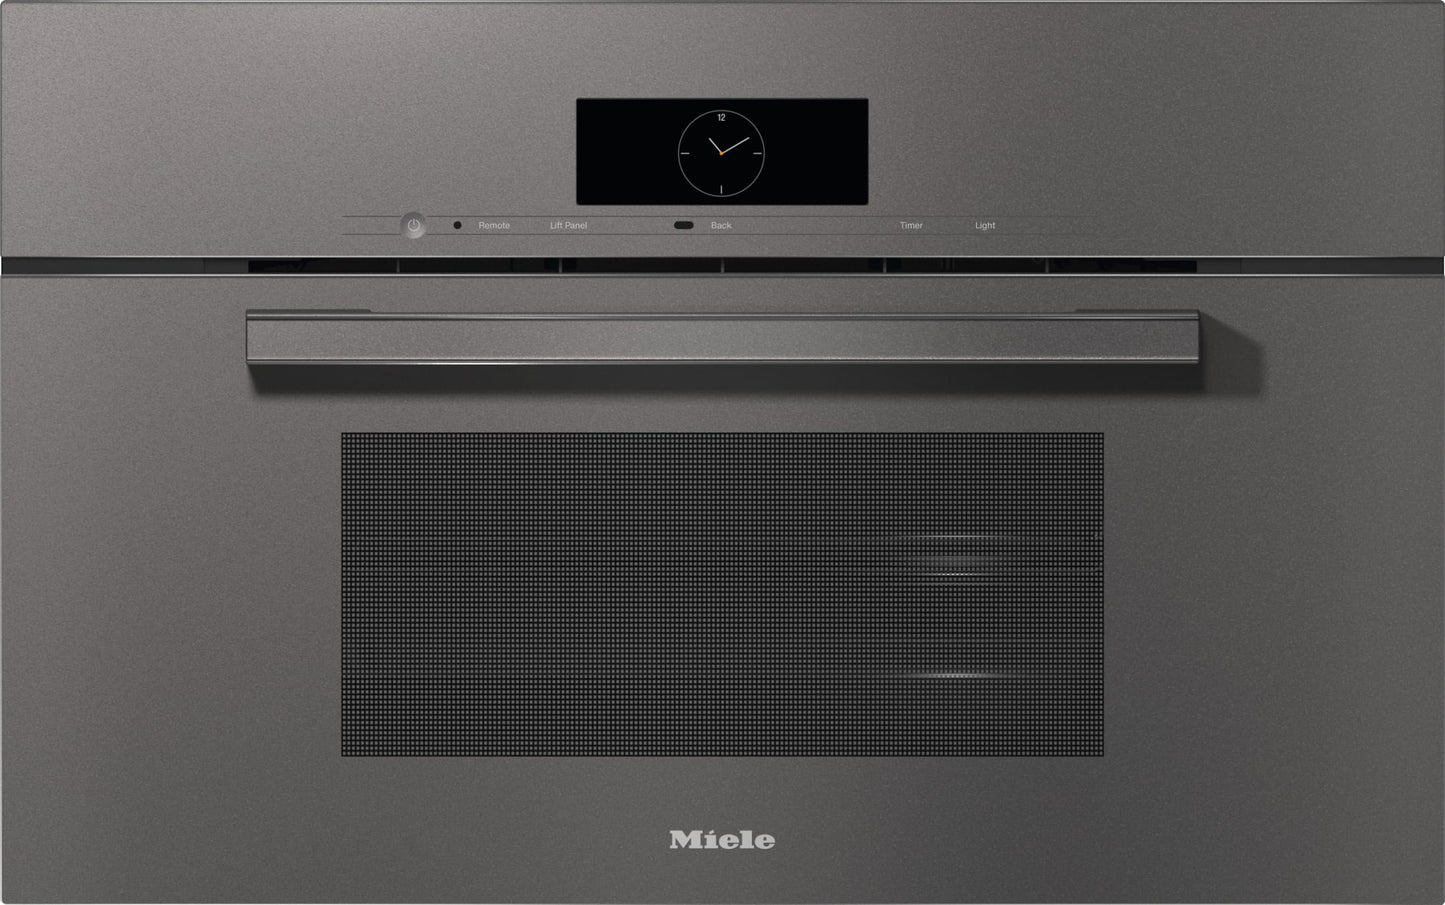 Miele DGC7870 GREY  30" Compact Combi-Steam Oven Xl For Steam Cooking, Baking, Roasting With Roast Probe + Menu Cooking.